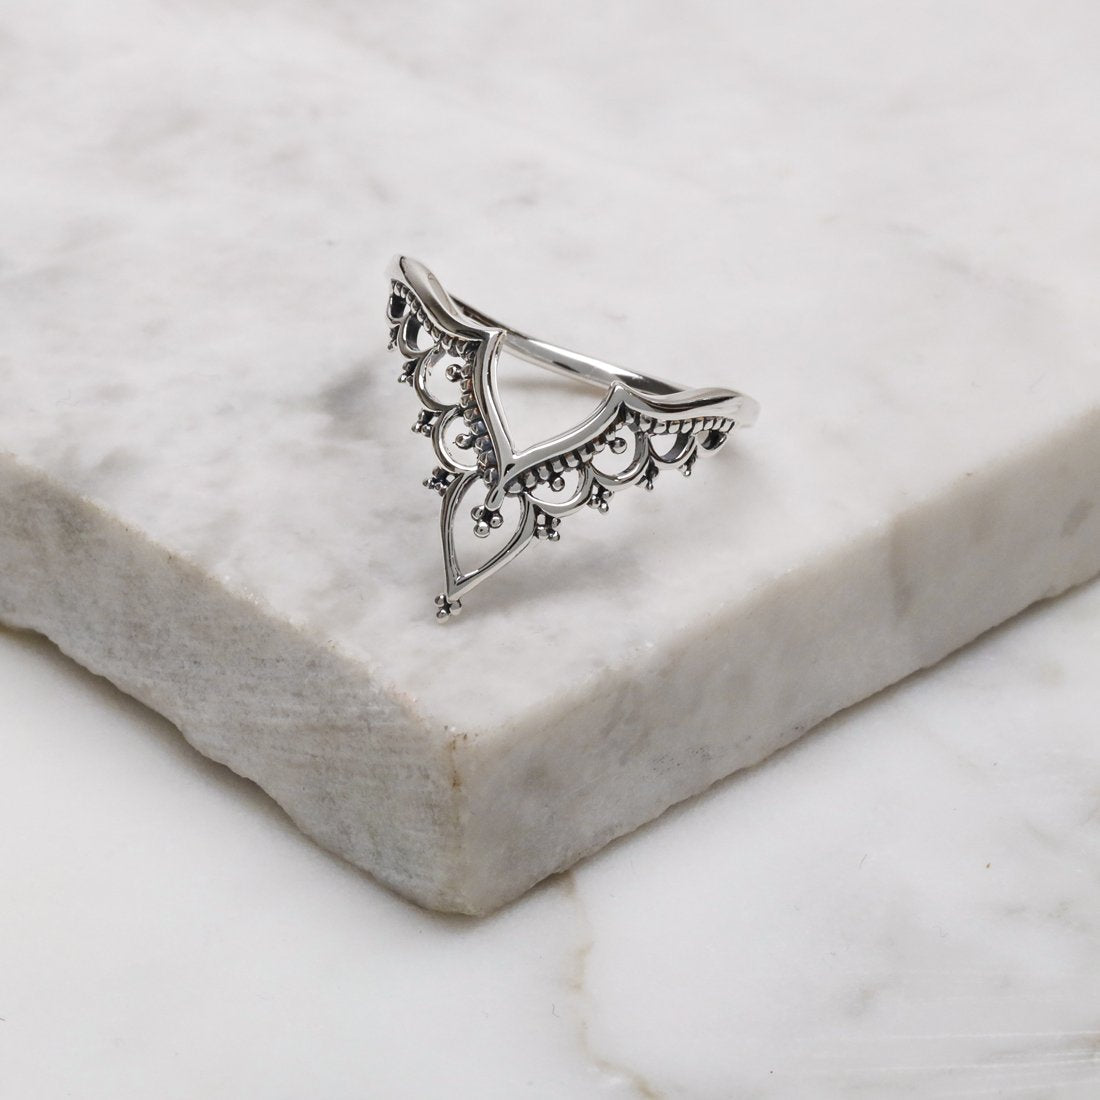 Silver ring with filigree V shape